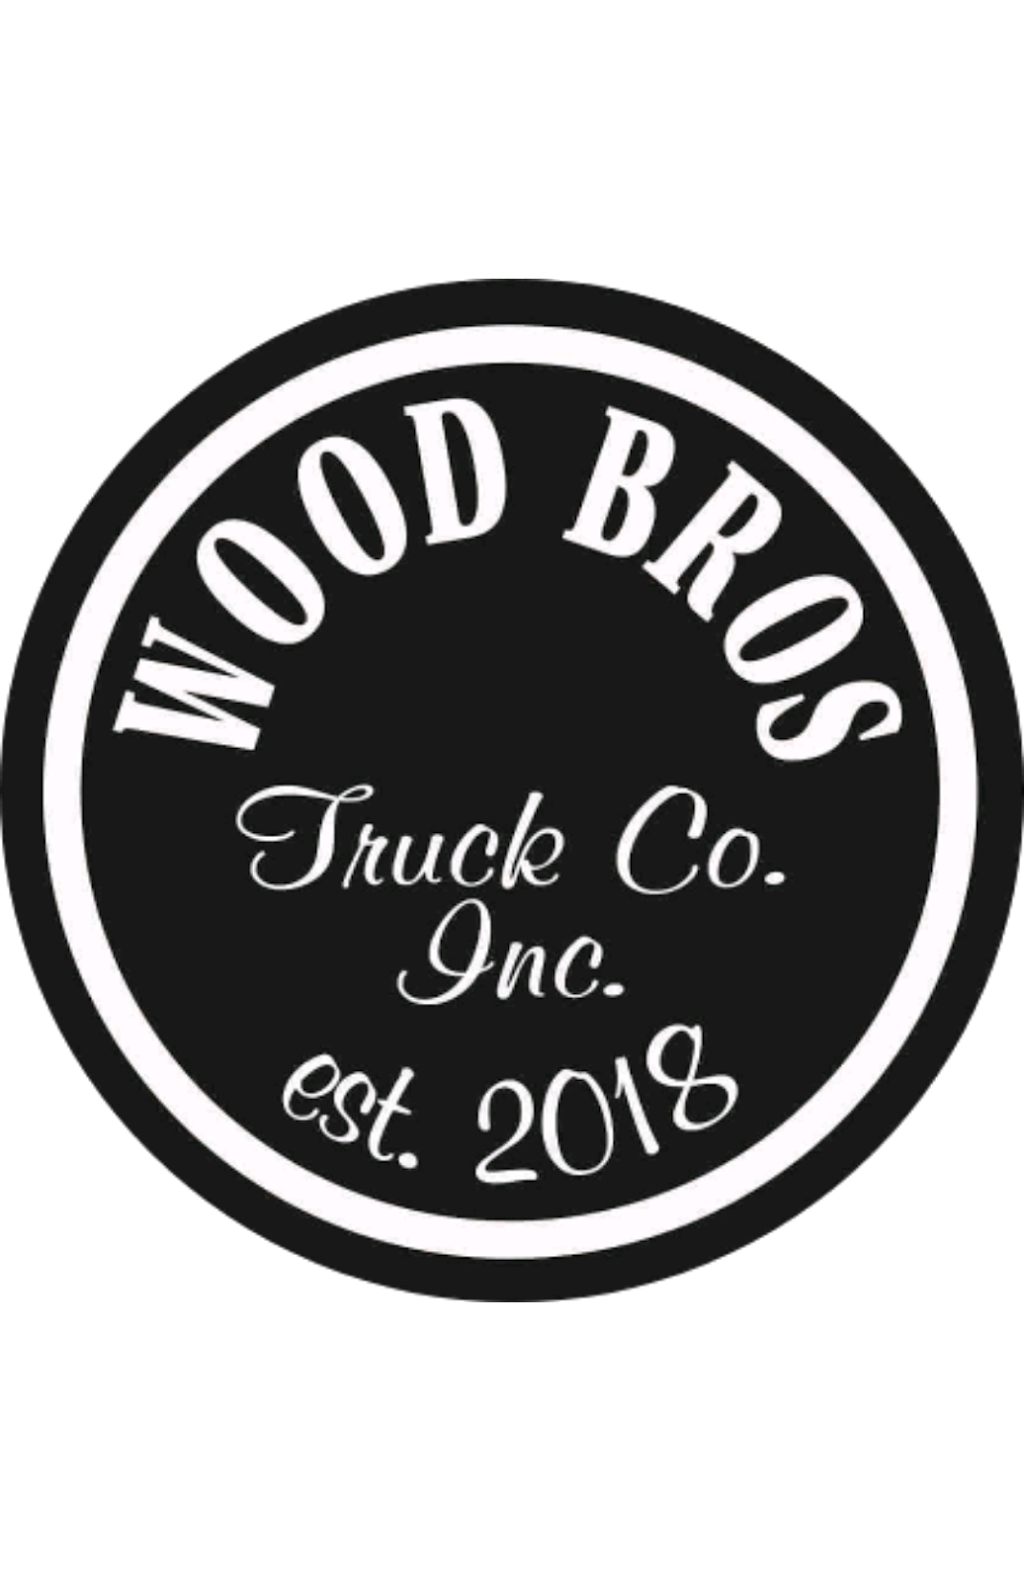 Wood Bros Truck Co. | car dealer | 1800 49 Ave, Red Deer, AB T4R 2N7, Canada | 4033427989 OR +1 403-342-7989